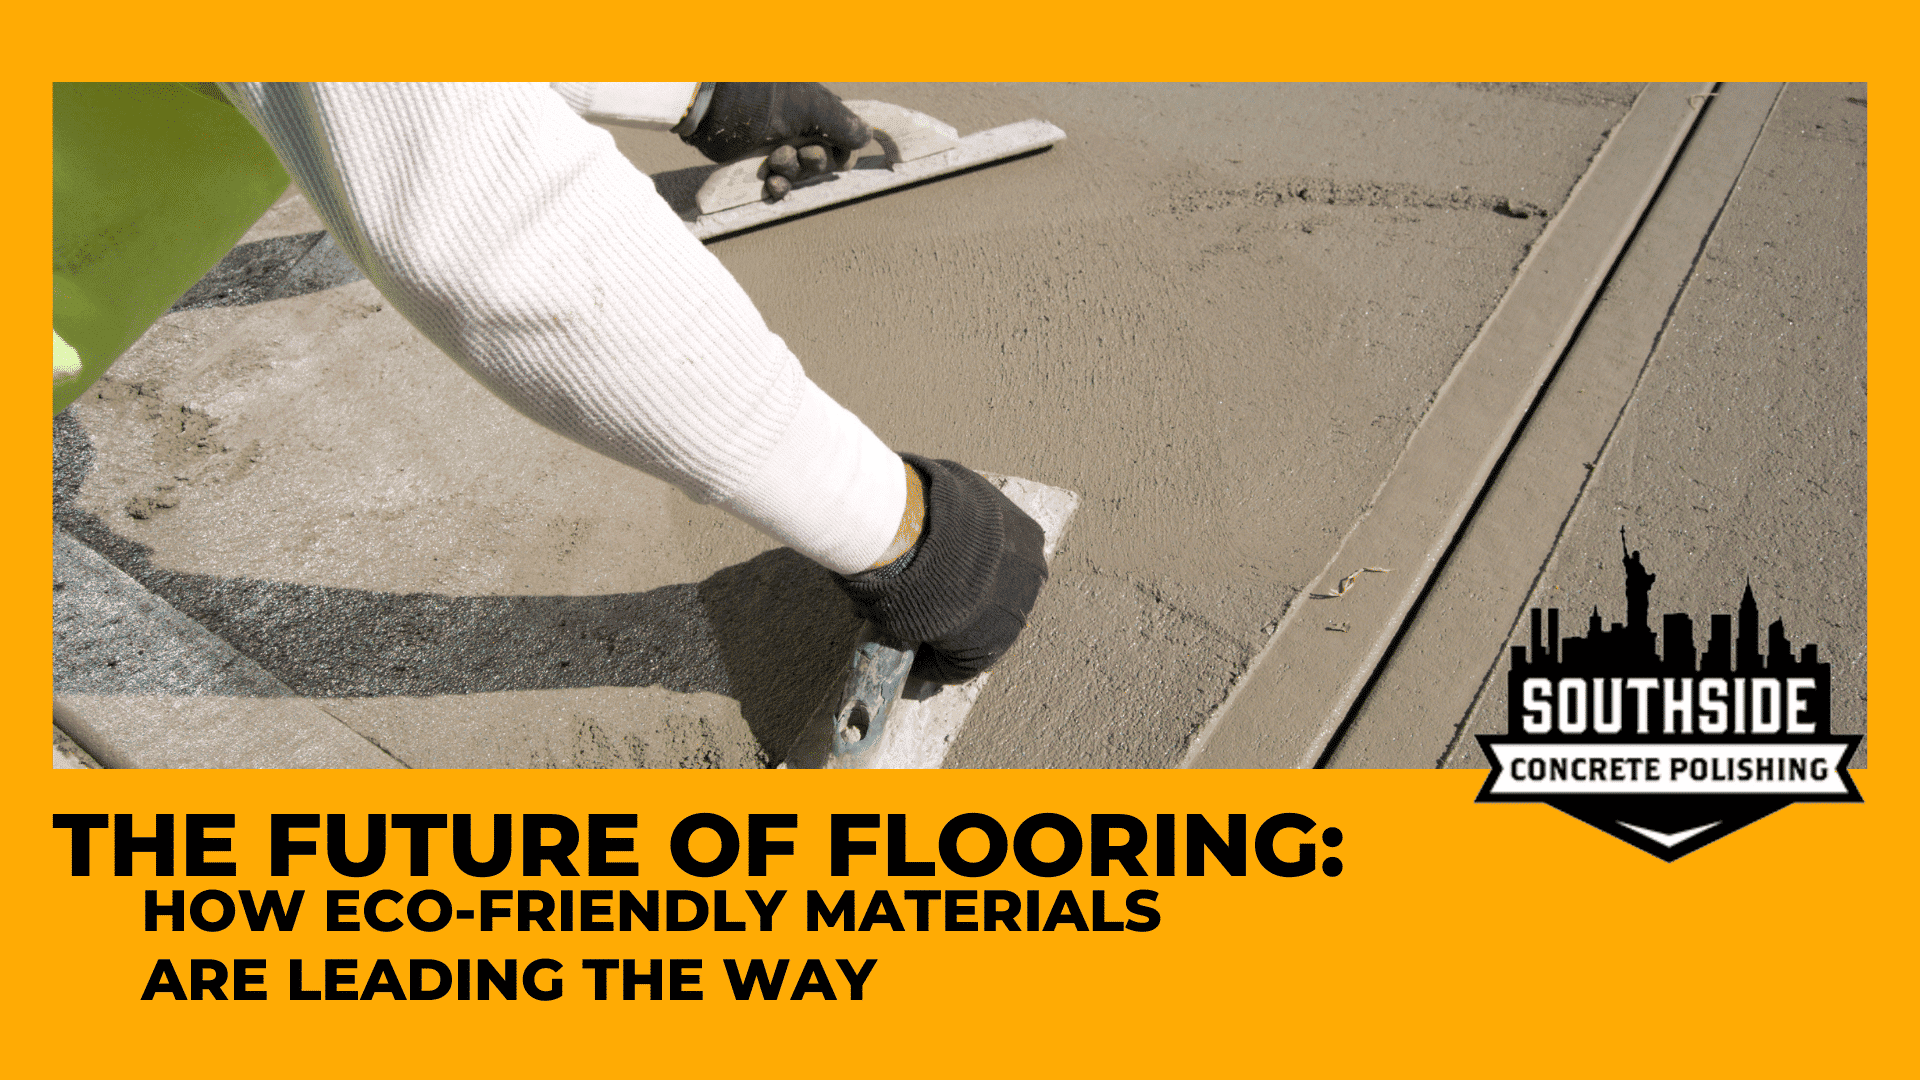 The Future of Flooring: How Eco-Friendly Materials are Leading the Way 2